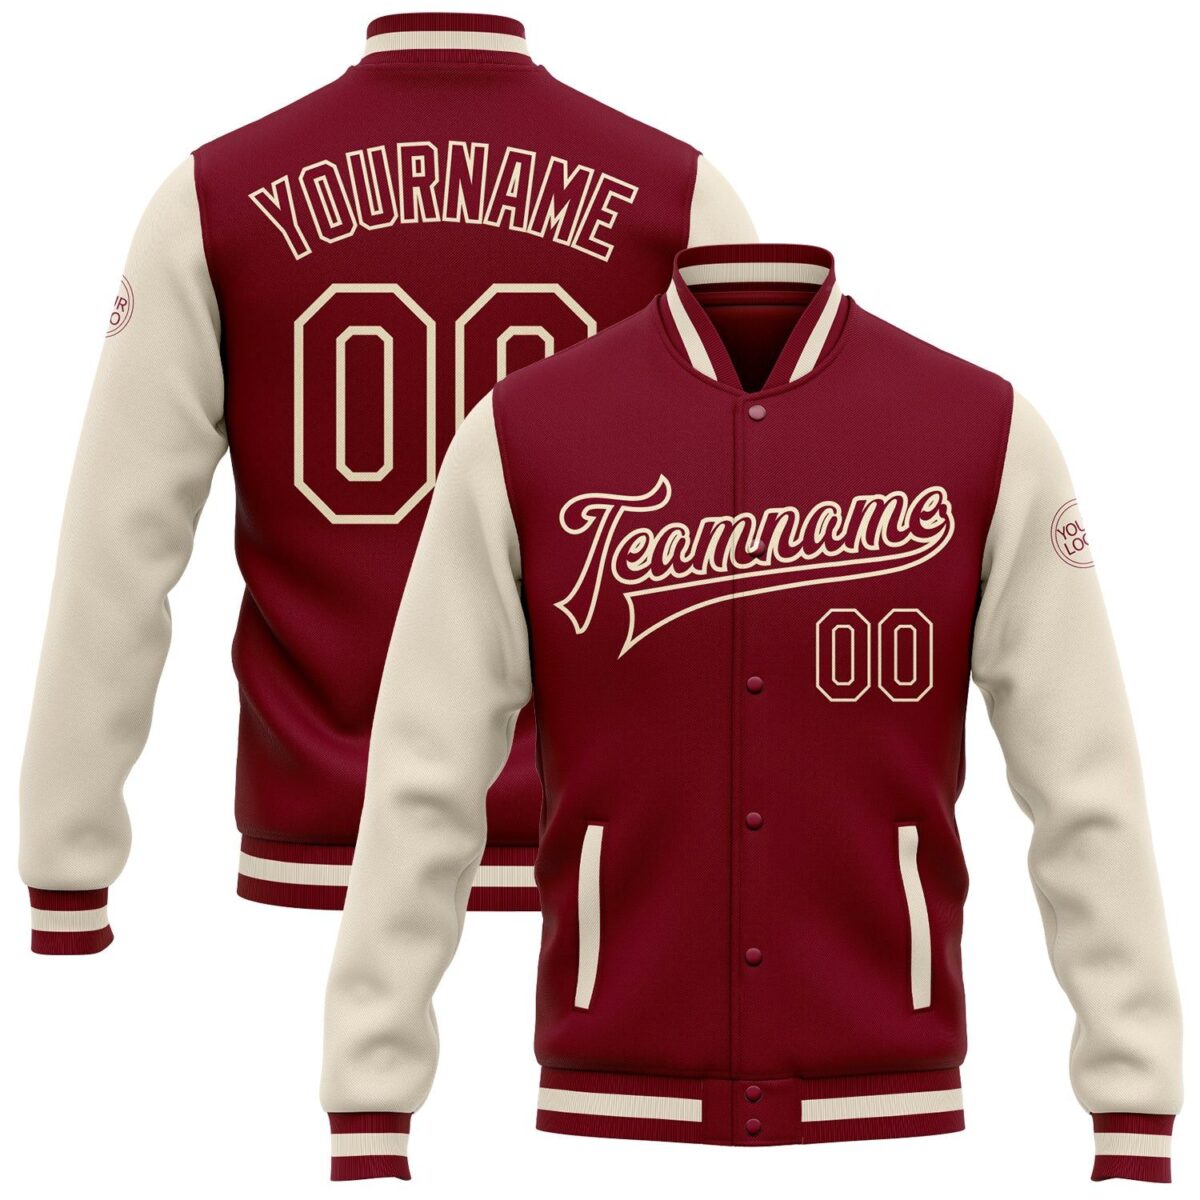 College Student Jacket with Maroon & cream 1